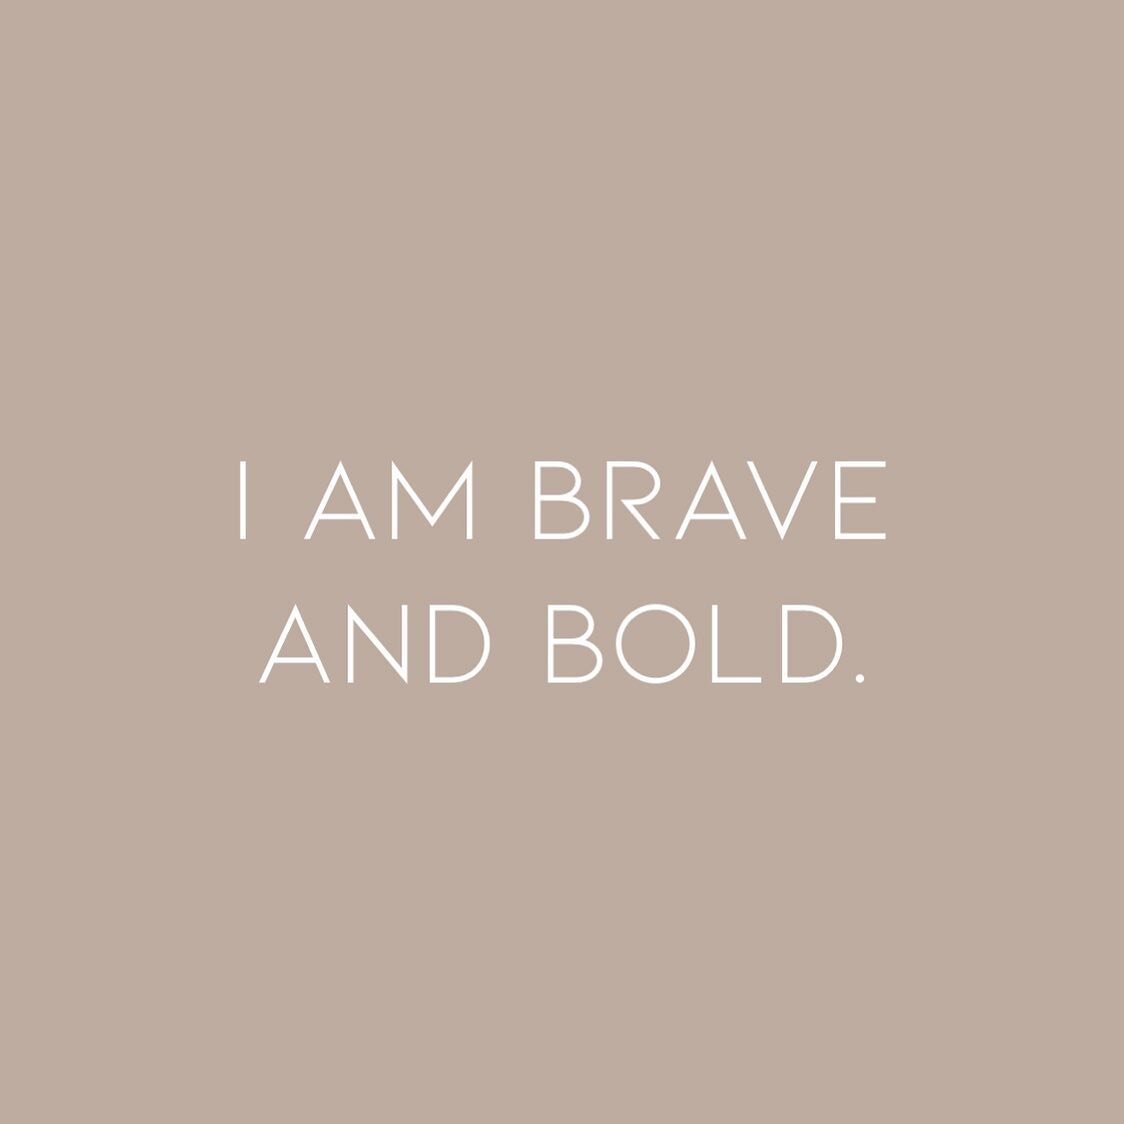 Say that one more time and say it LOUD! 

#womeninbusiness #womensupportingwomen #womanownedsmallbusiness #cwdecorating #instagramquote #iam #quoteoftheday #brave #bold #selfconfidencequotes